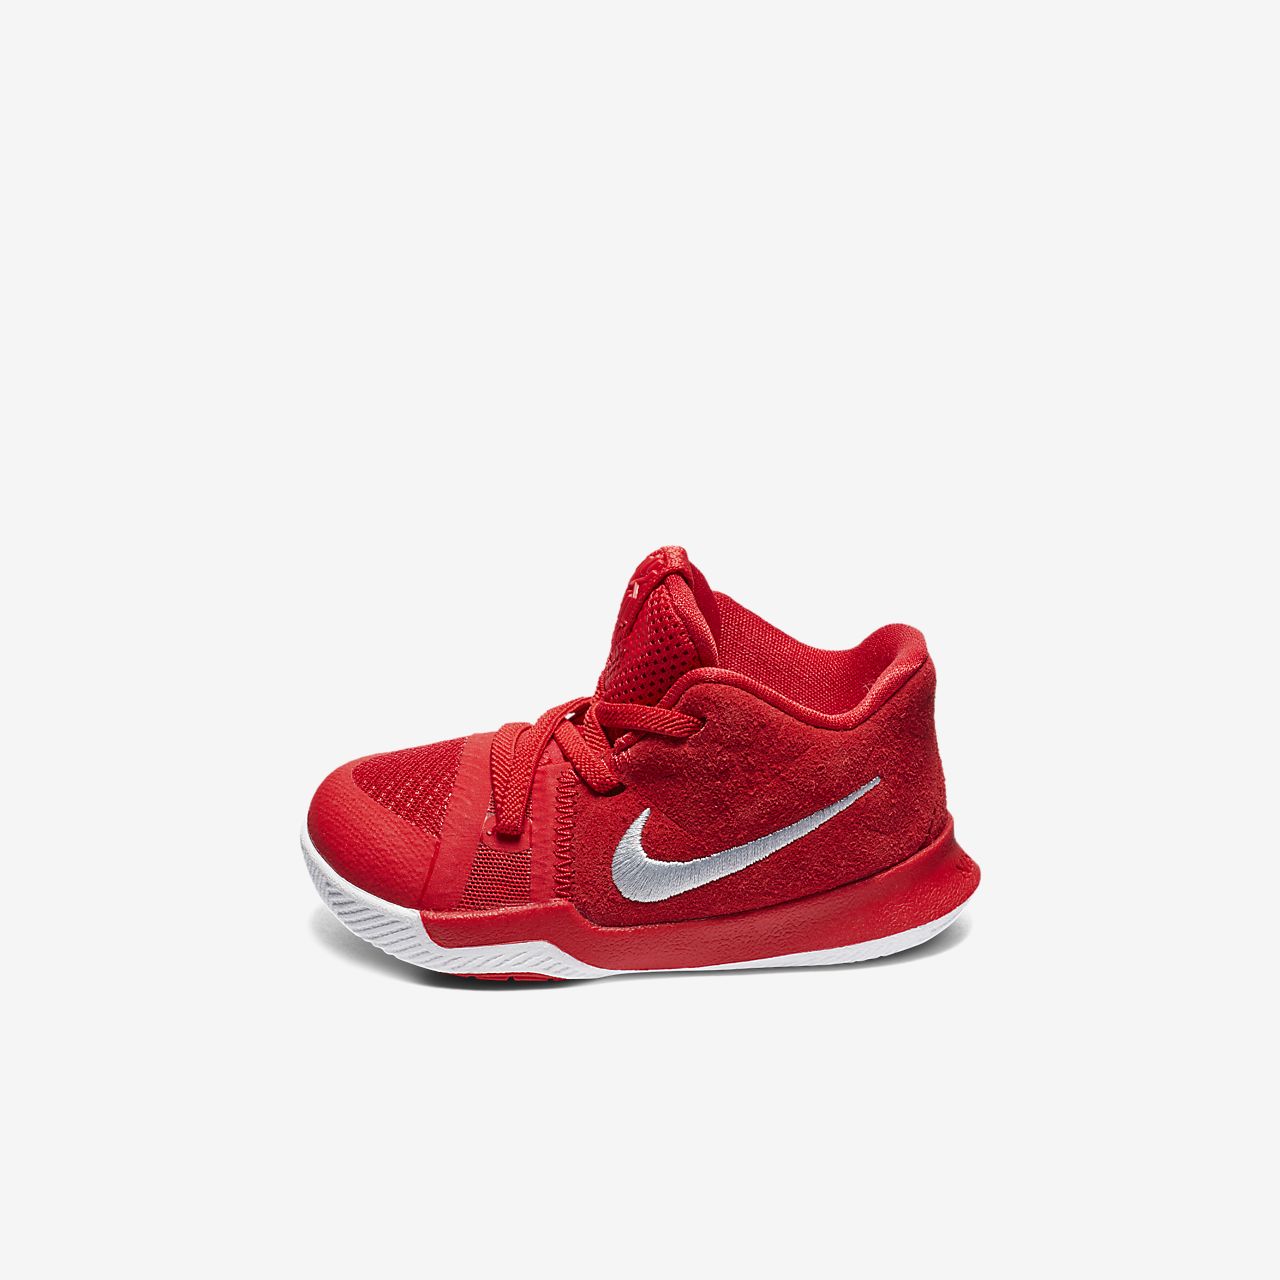 nike kyrie 3 toddler cheap online